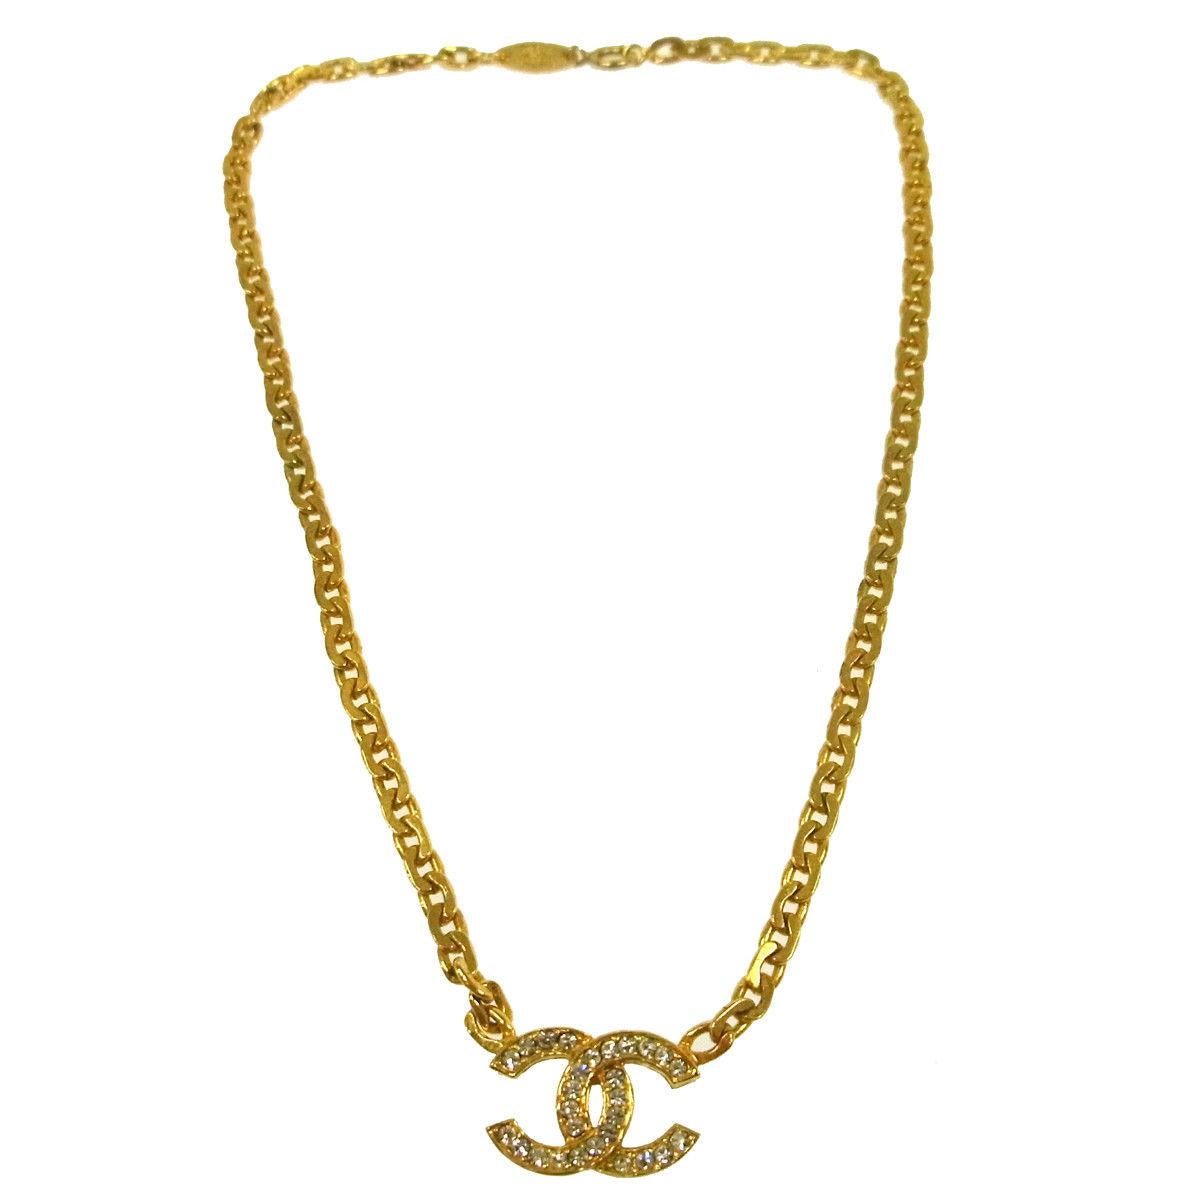 Chanel Gold Chain Link Rhinestone Charm Evening Necklace in Box